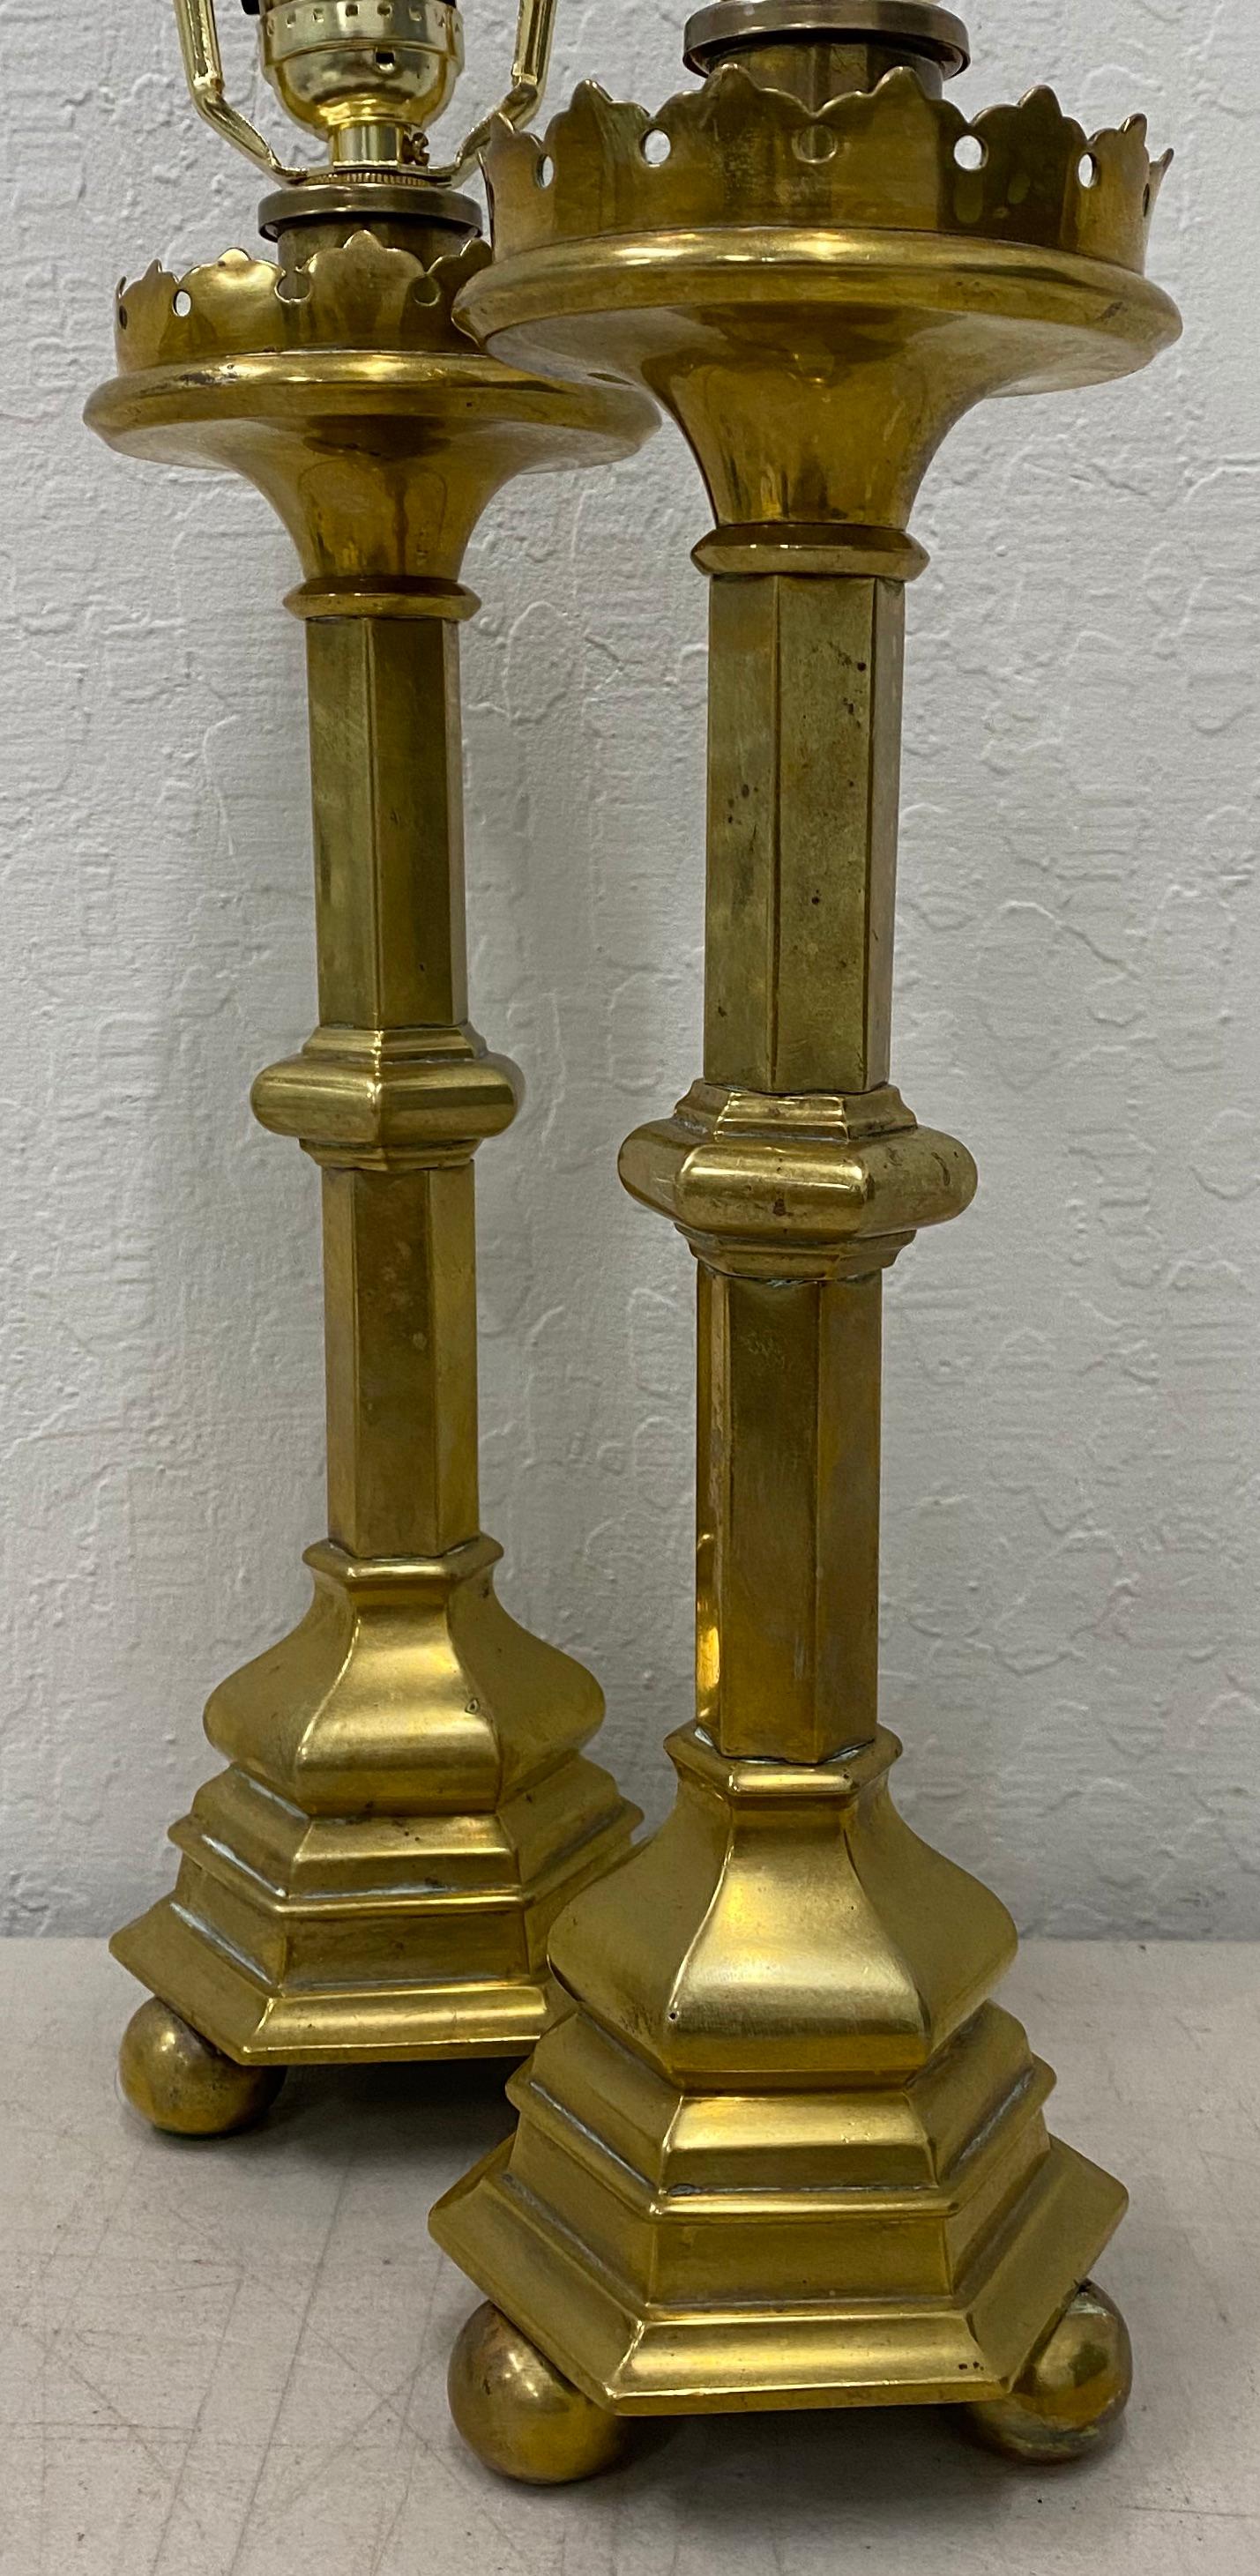 Mid-19th century brass oil lamps converted to table lamps

Measures: 4